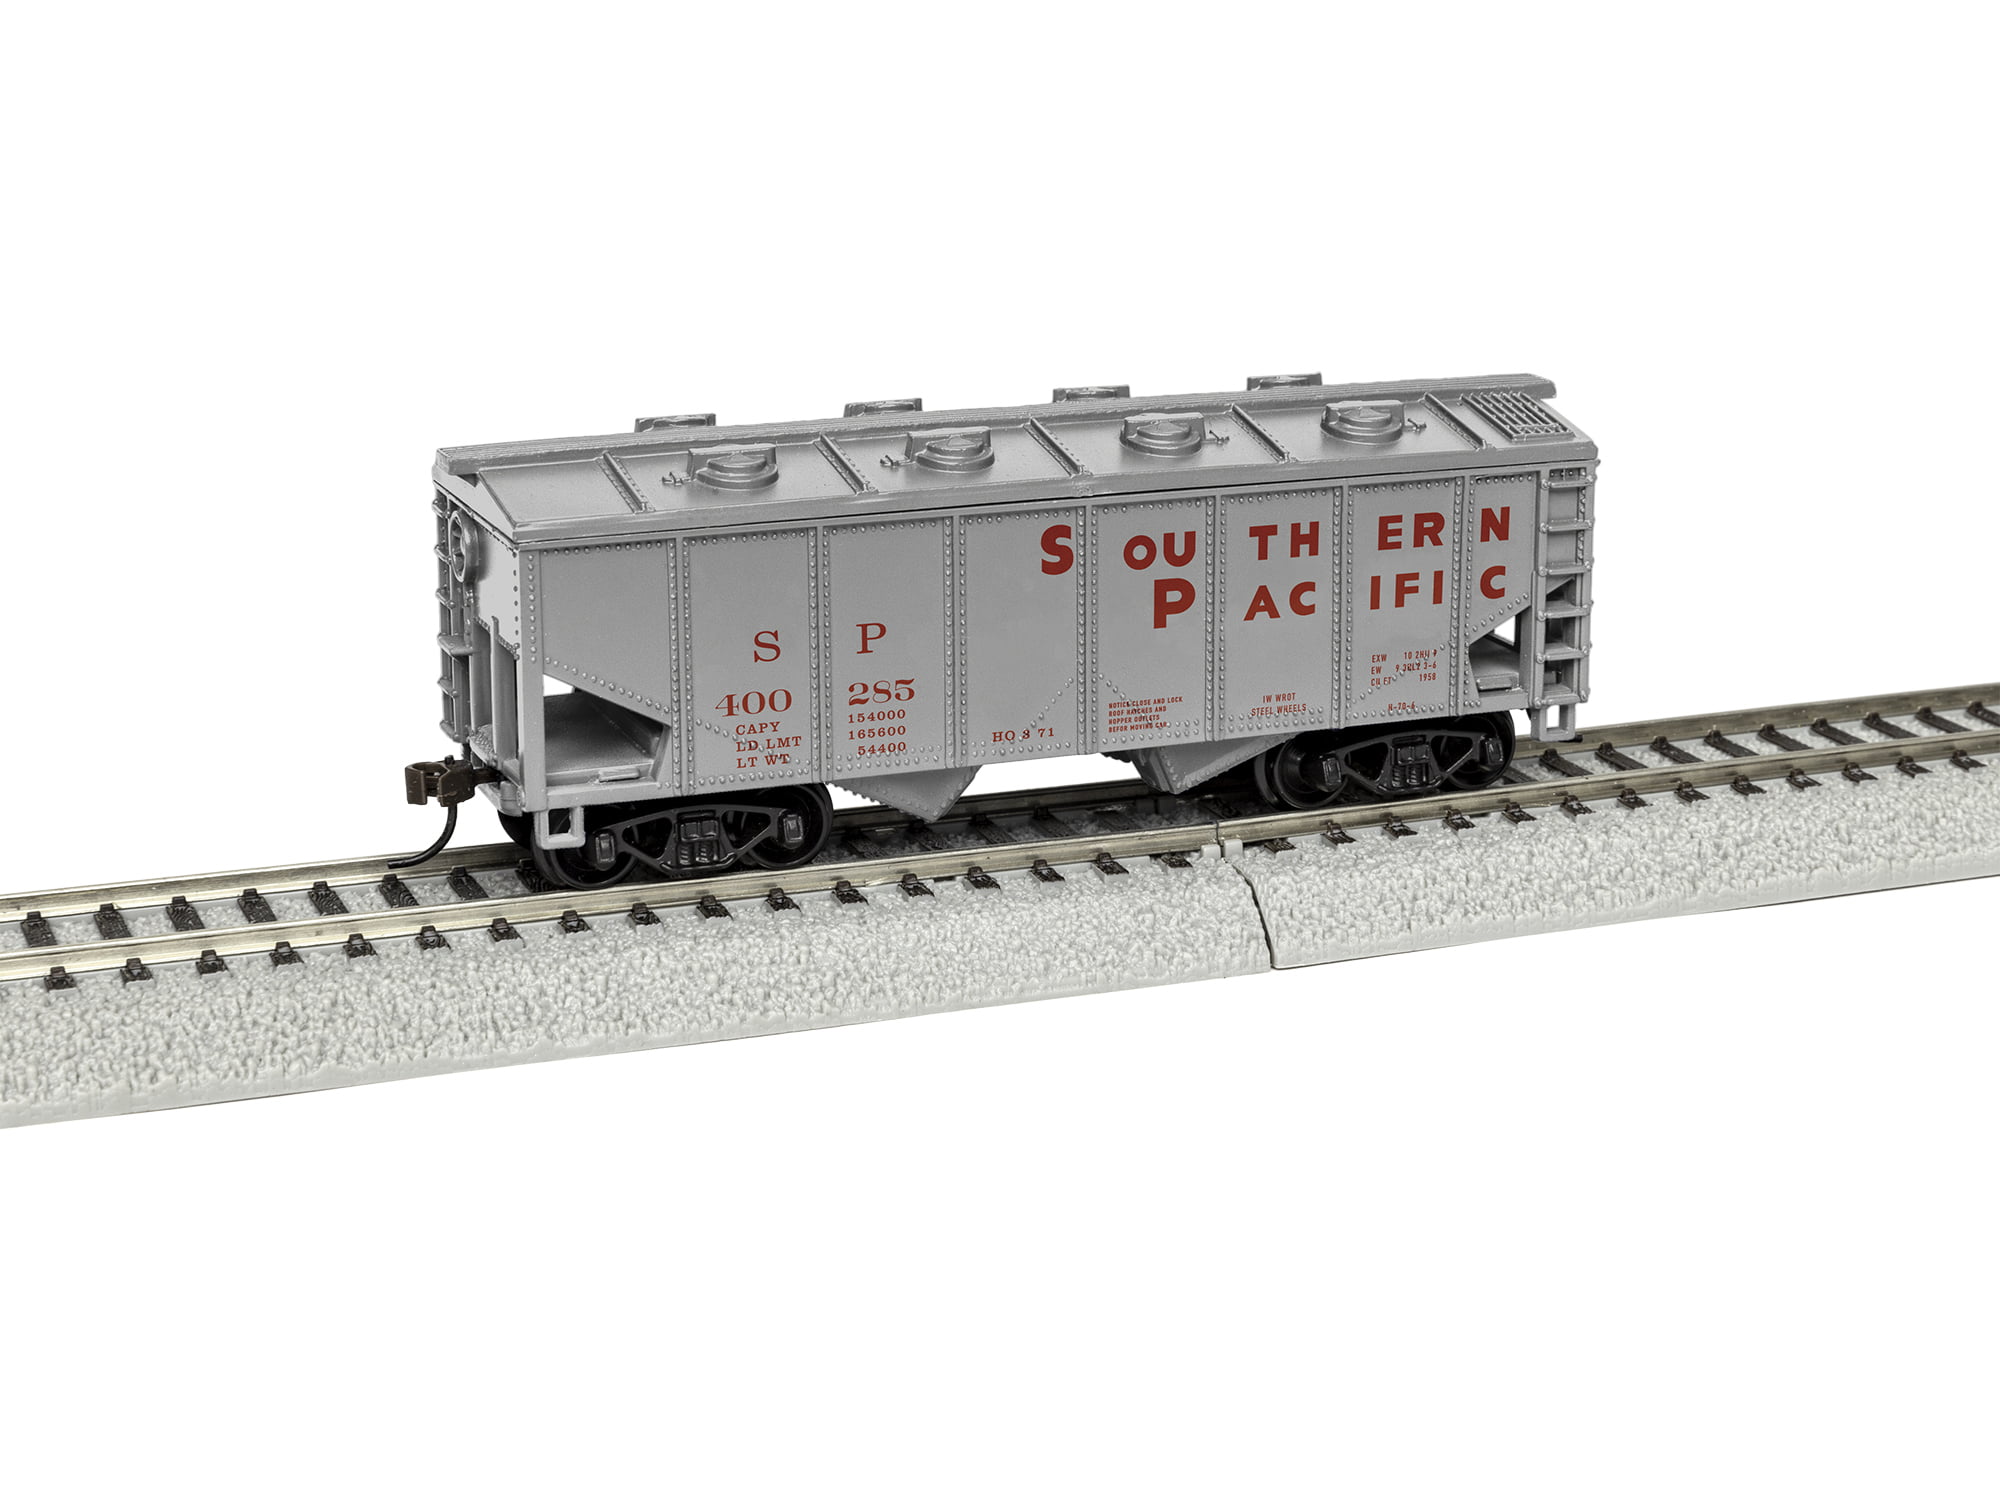 PS-2 Two-Bay Covered Hopper New York Central Bachmann HO-Gauge